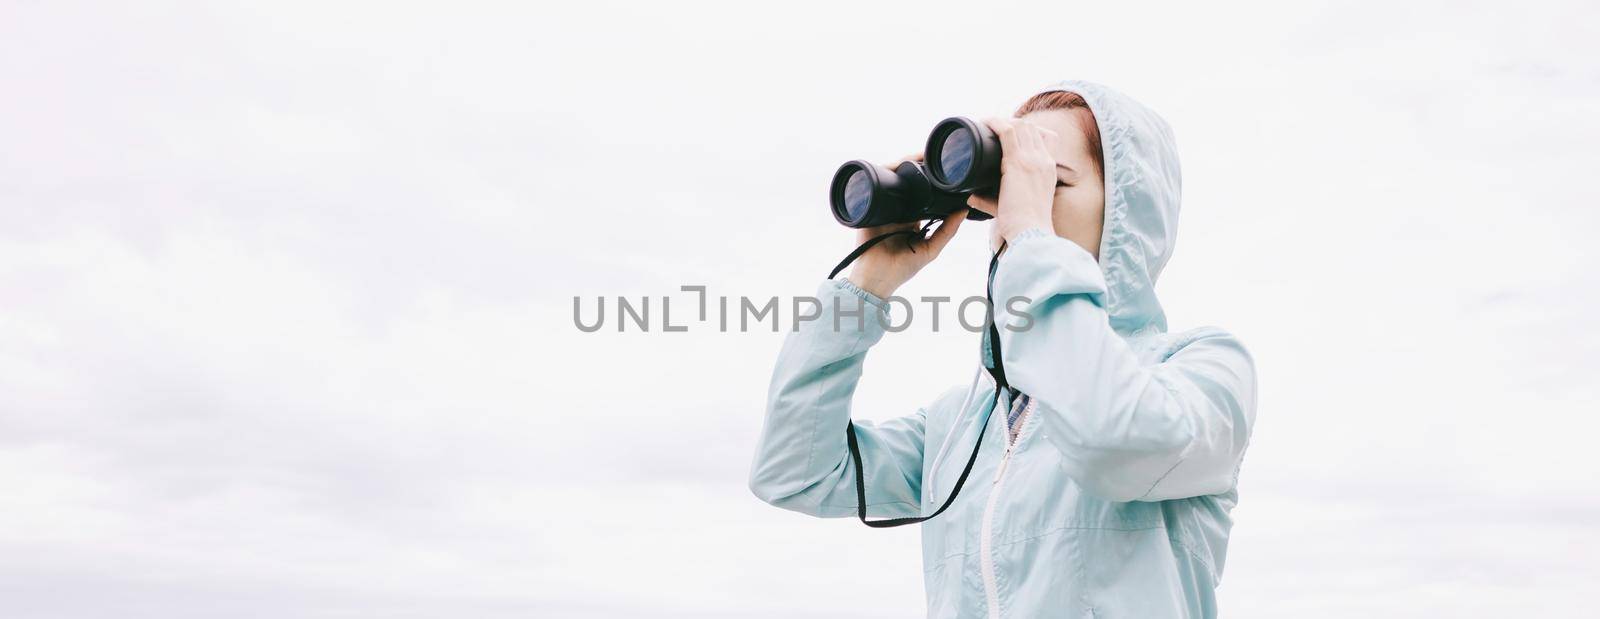 Traveler young woman looking through binoculars on background of sky. Copy-space in left part of image.